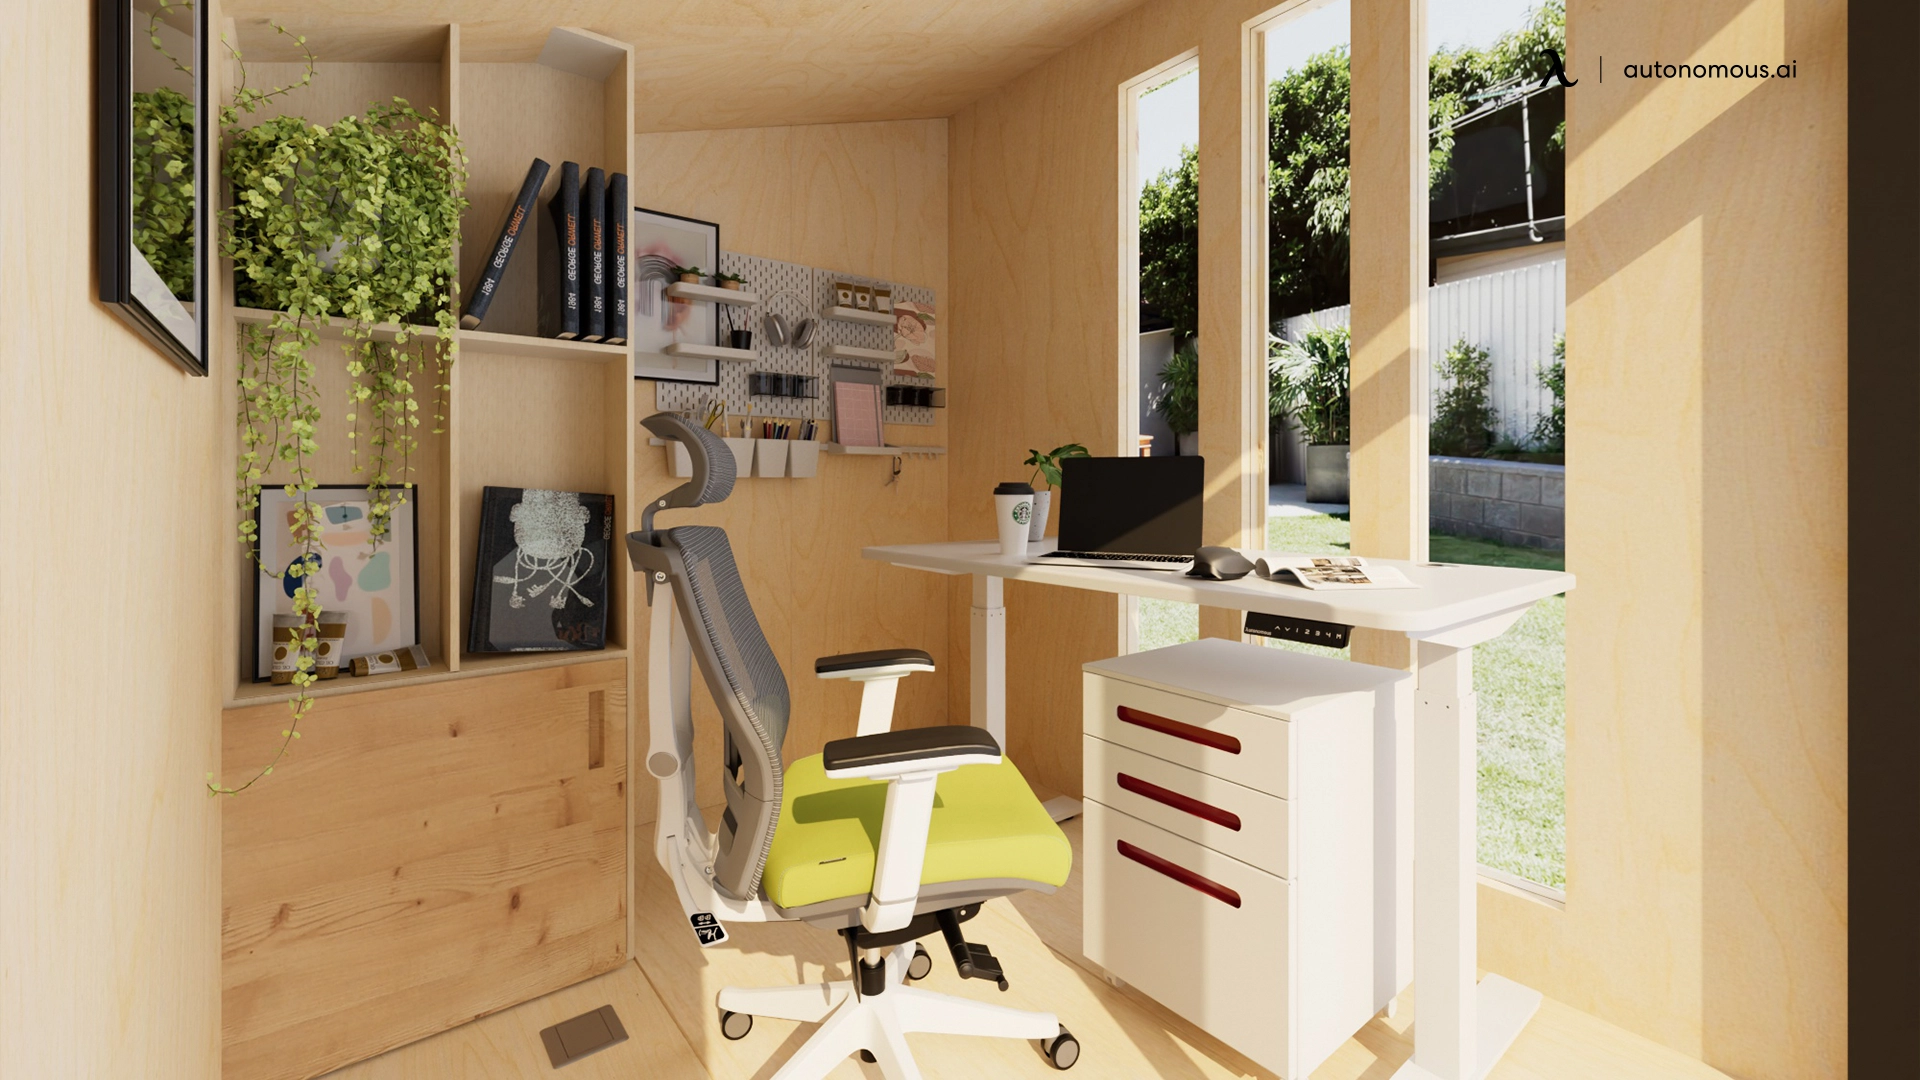 The Importance of Building a Private Space to Work at Home